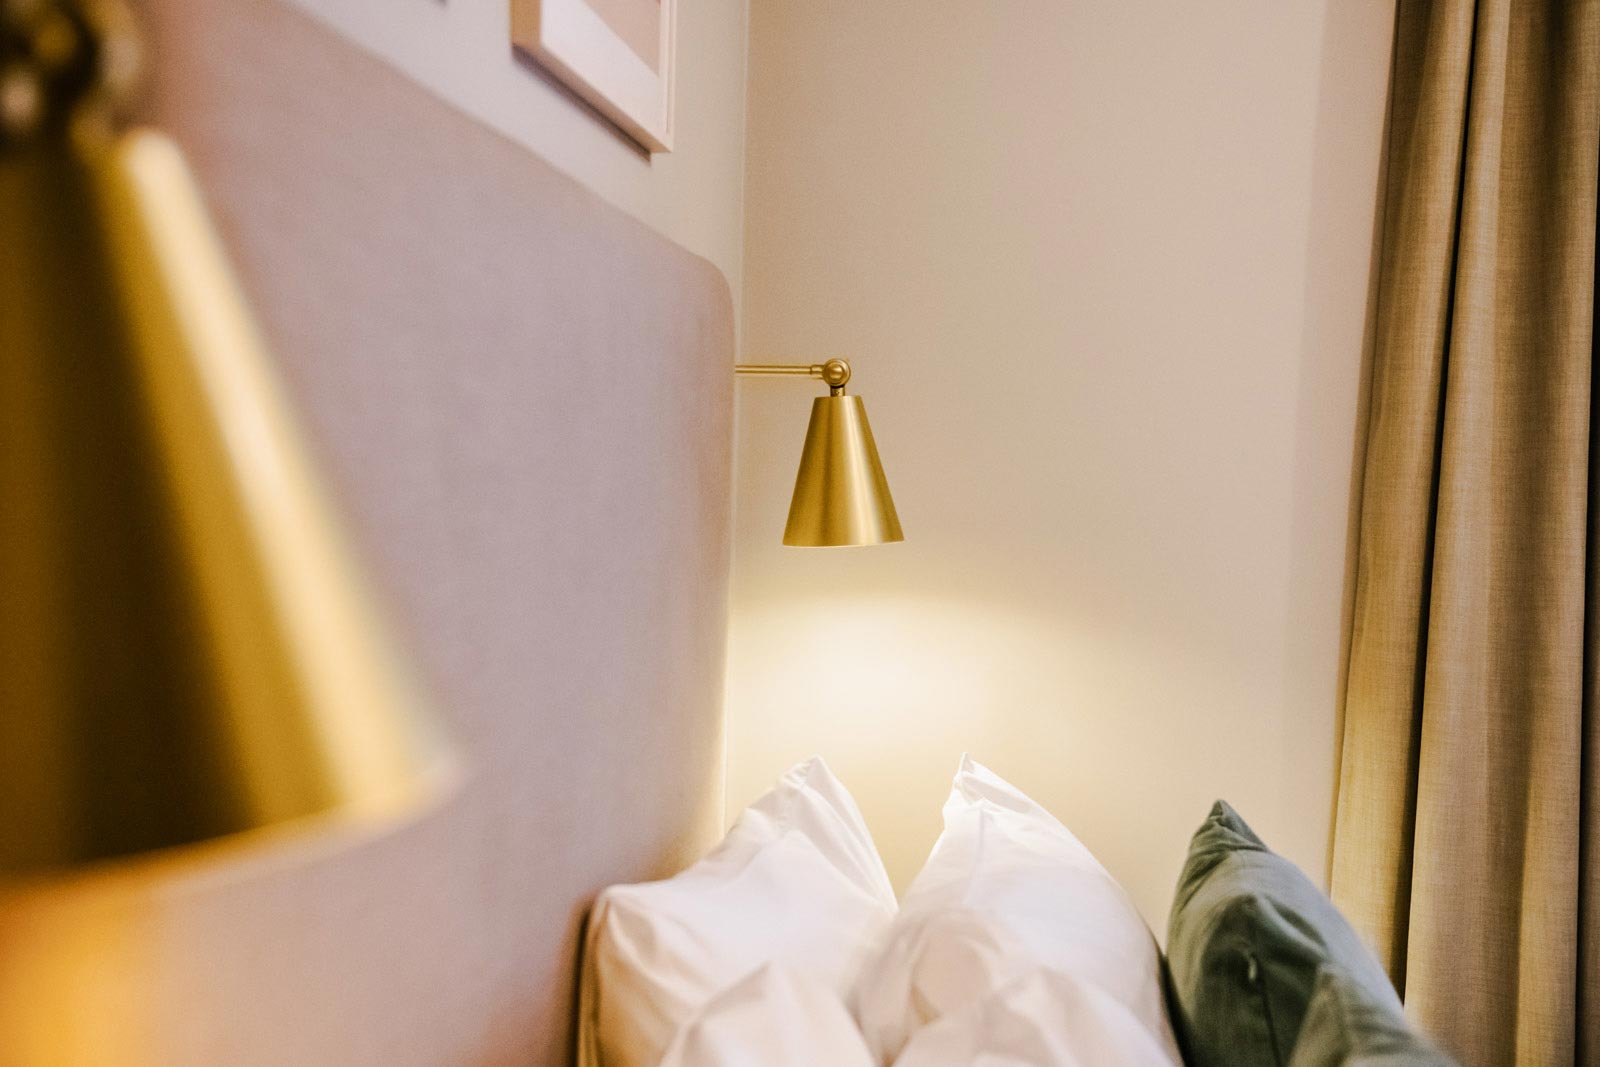 Brass Wall Lights Dress the Bedroom Suites of this Serviced Aparthotel